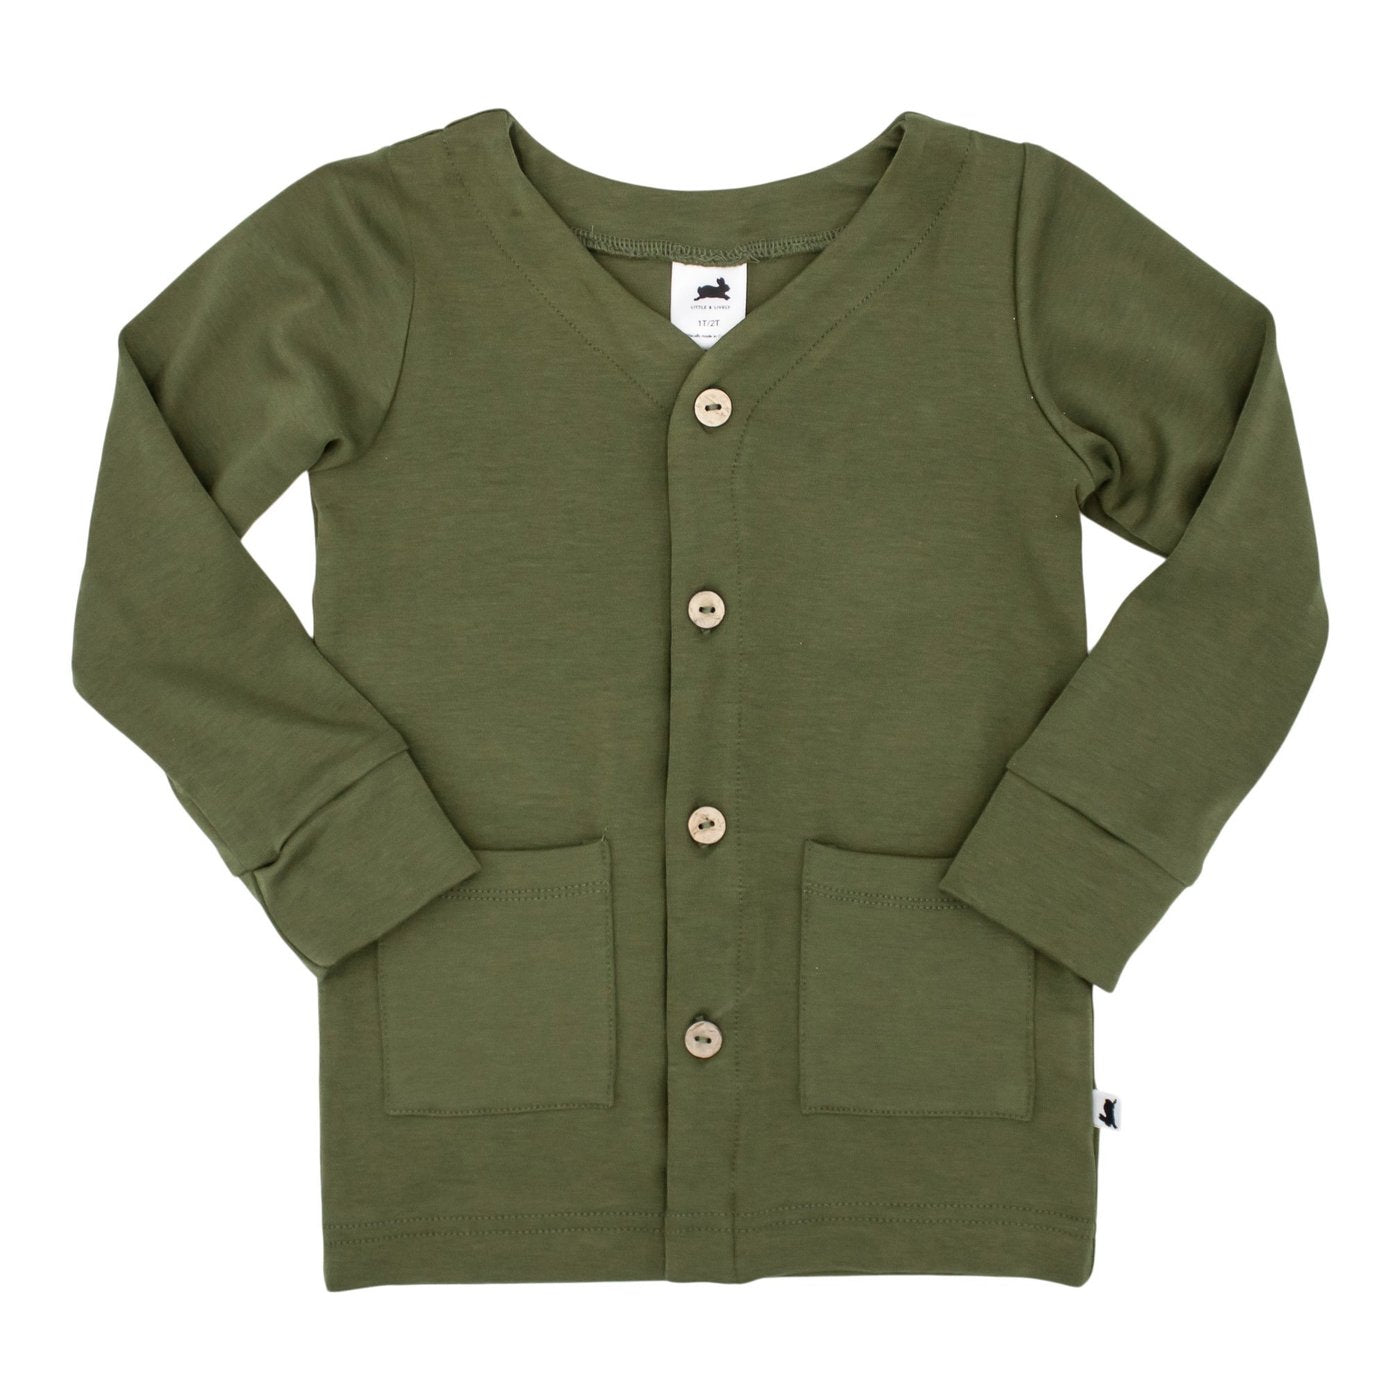 Baby/Kids Bamboo Cotton Cardigan - Olive